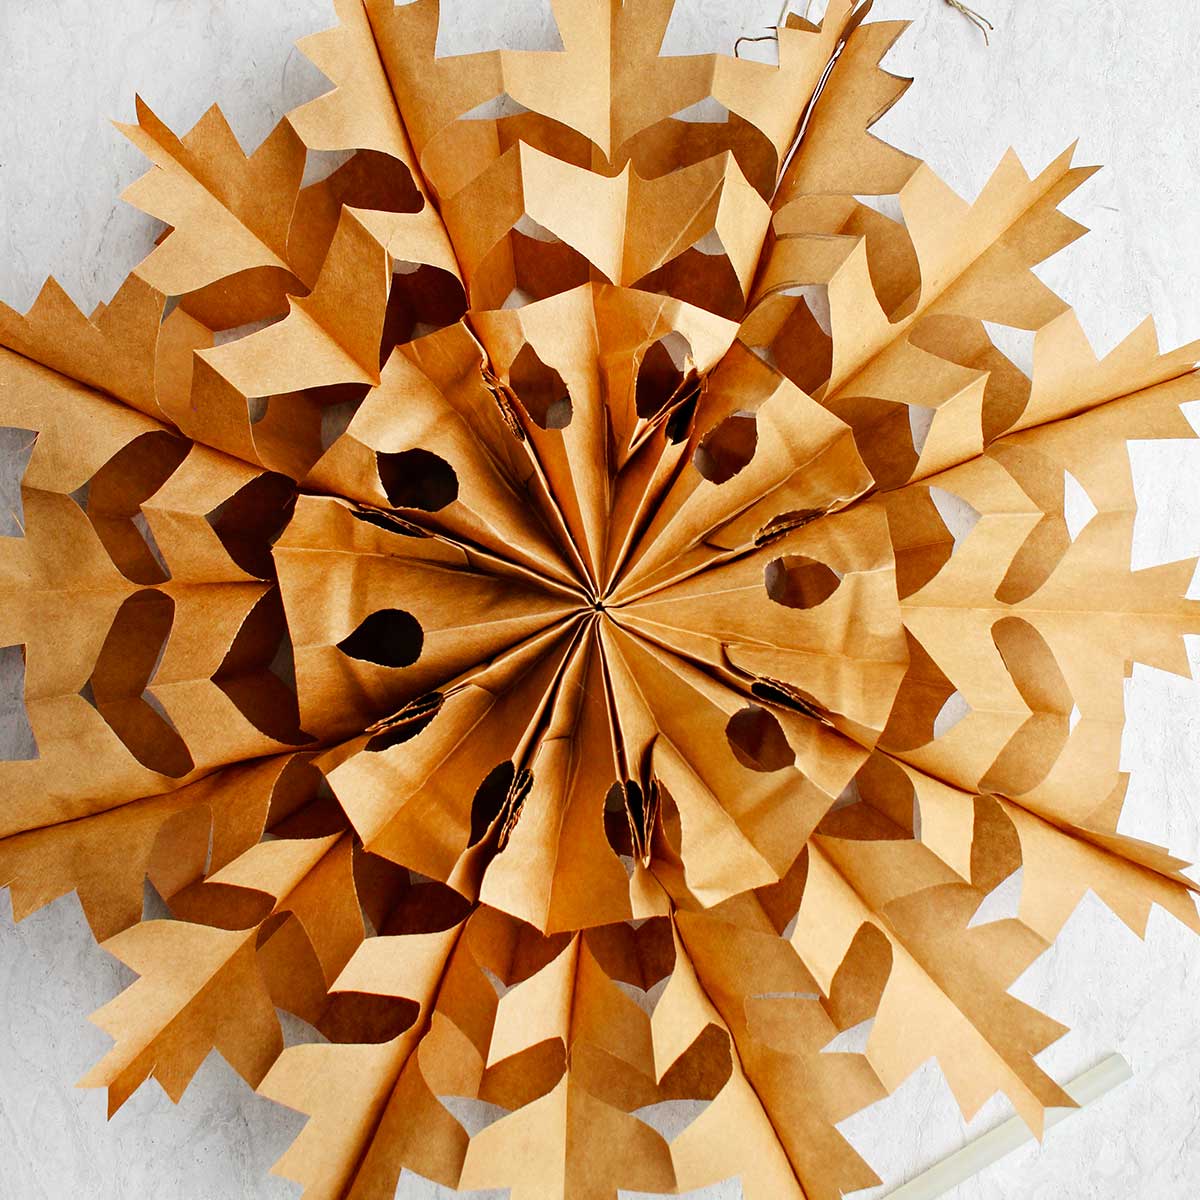 Square image of completed brown paper bag snowflake.